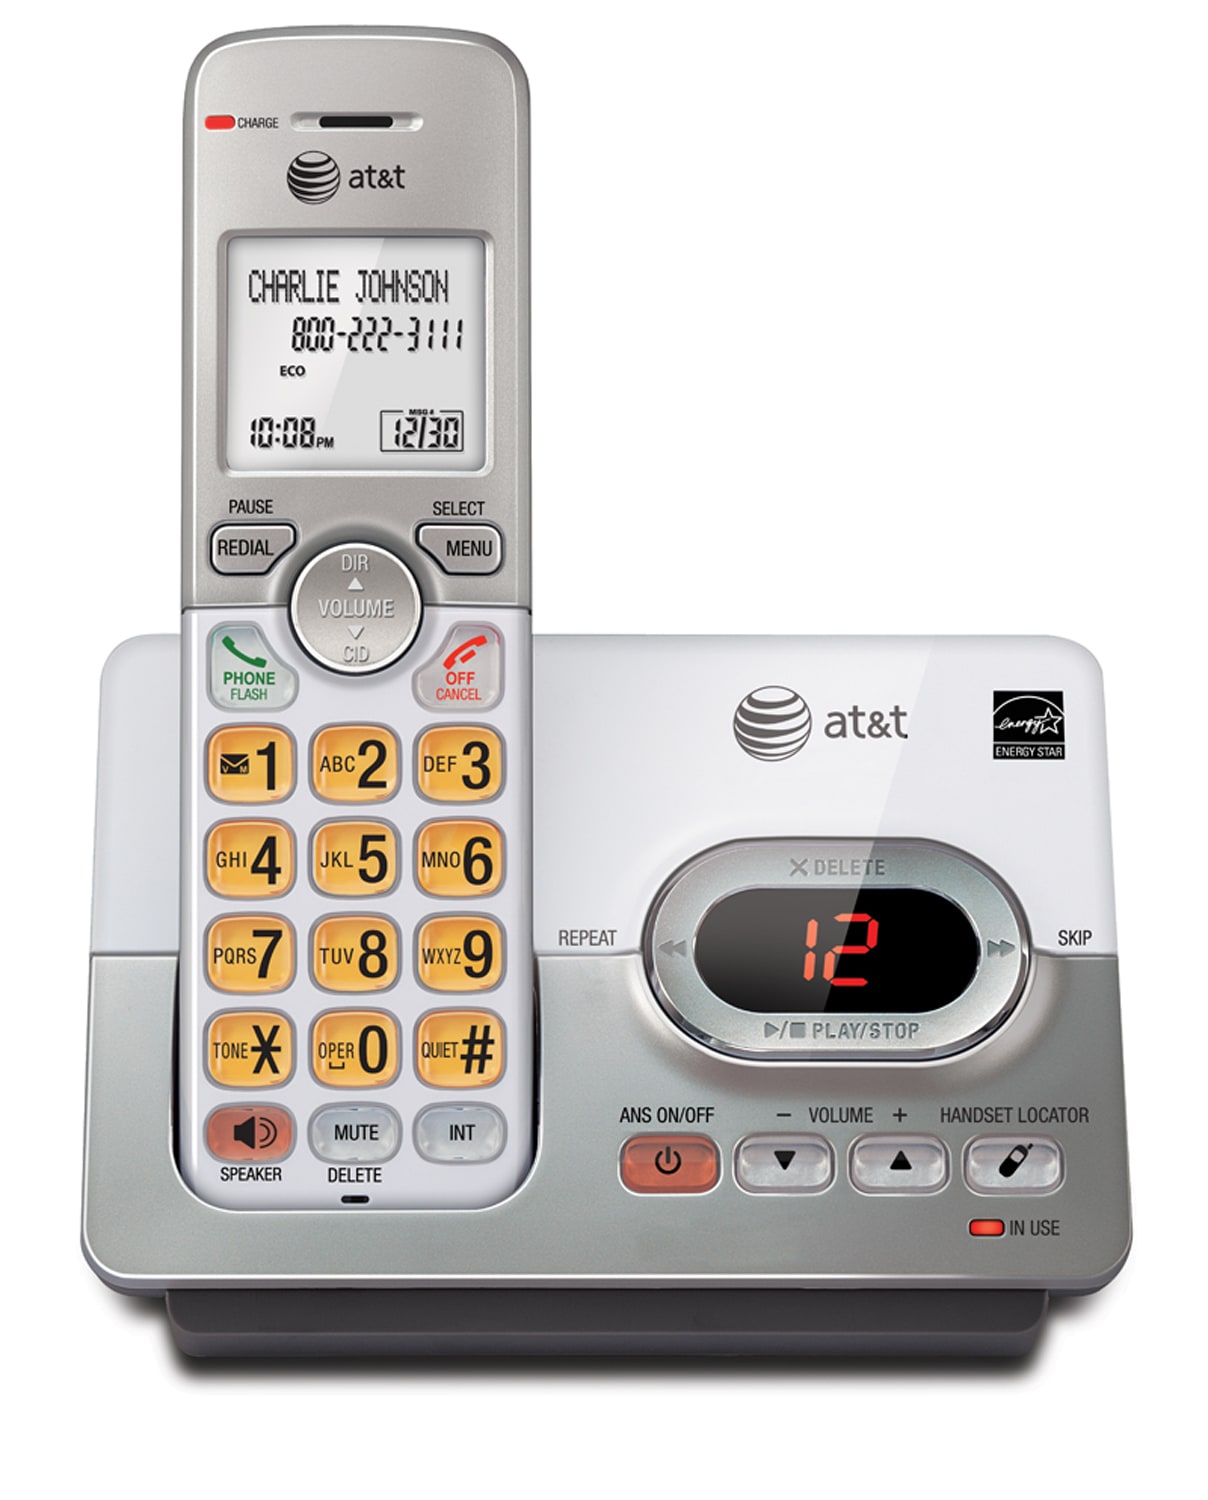 Cordless phone system with caller ID/call waiting - view 1